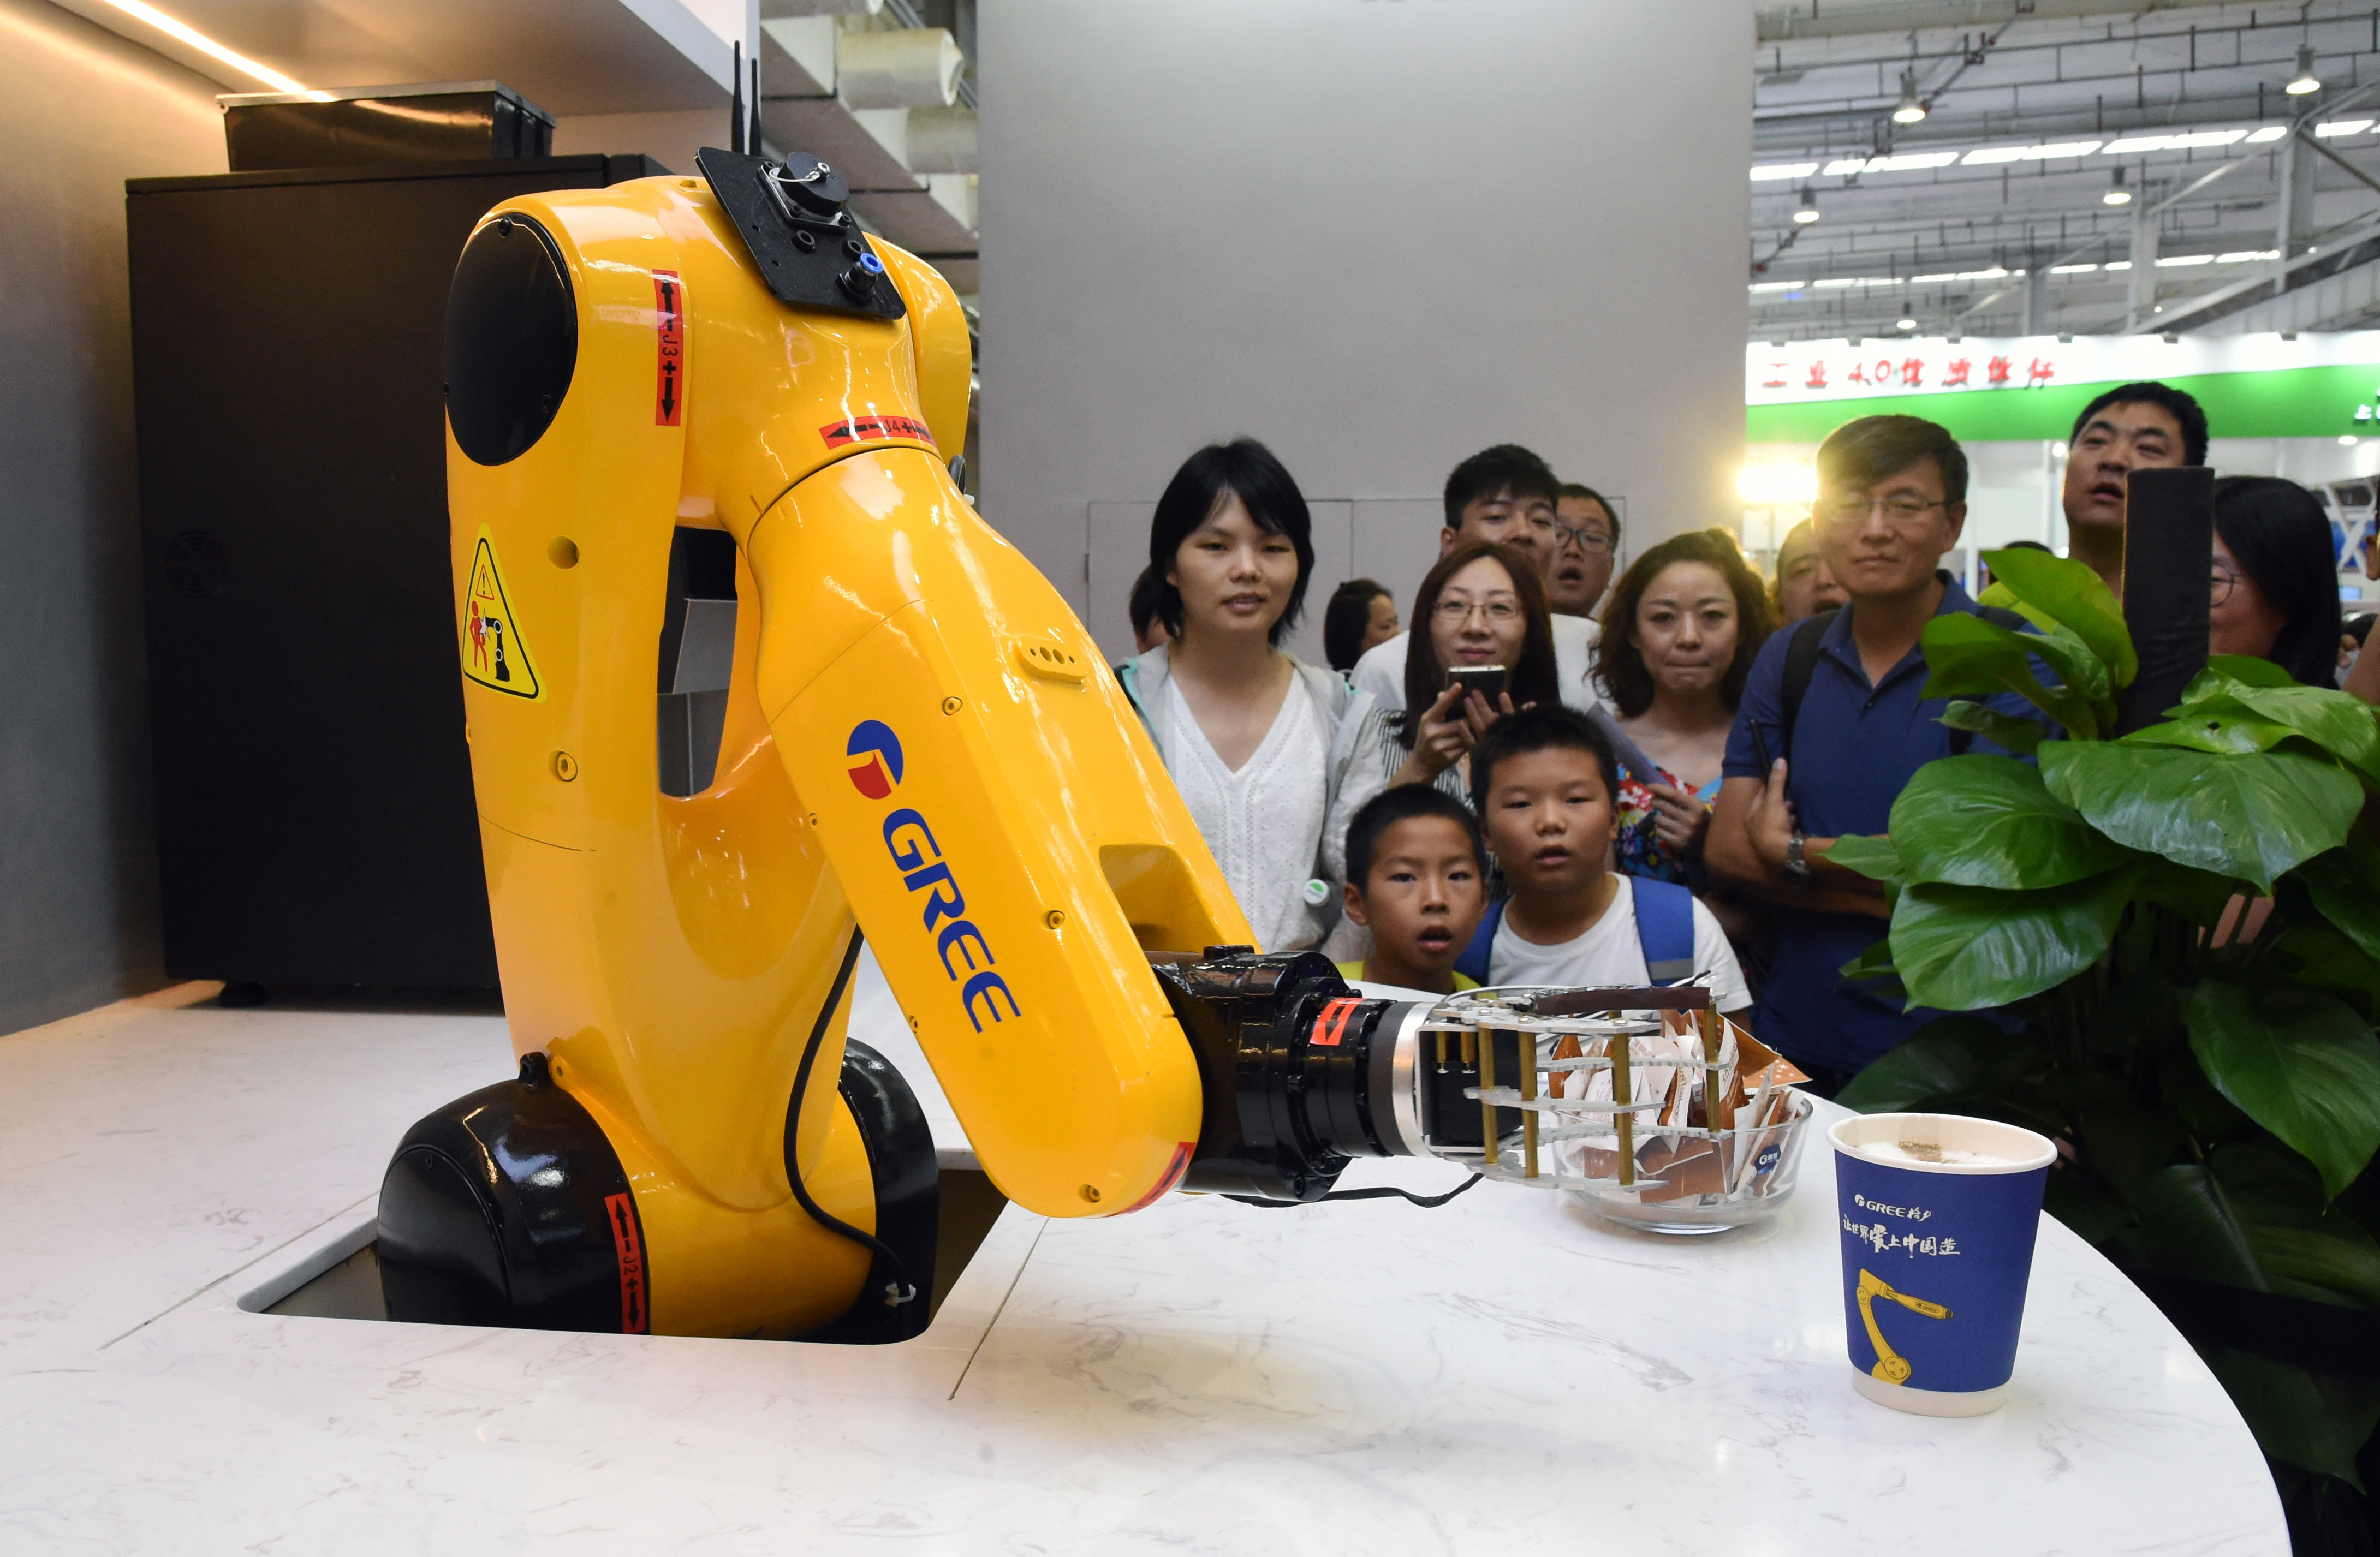 Workshop of the World' China Bets on a Robot Revolution